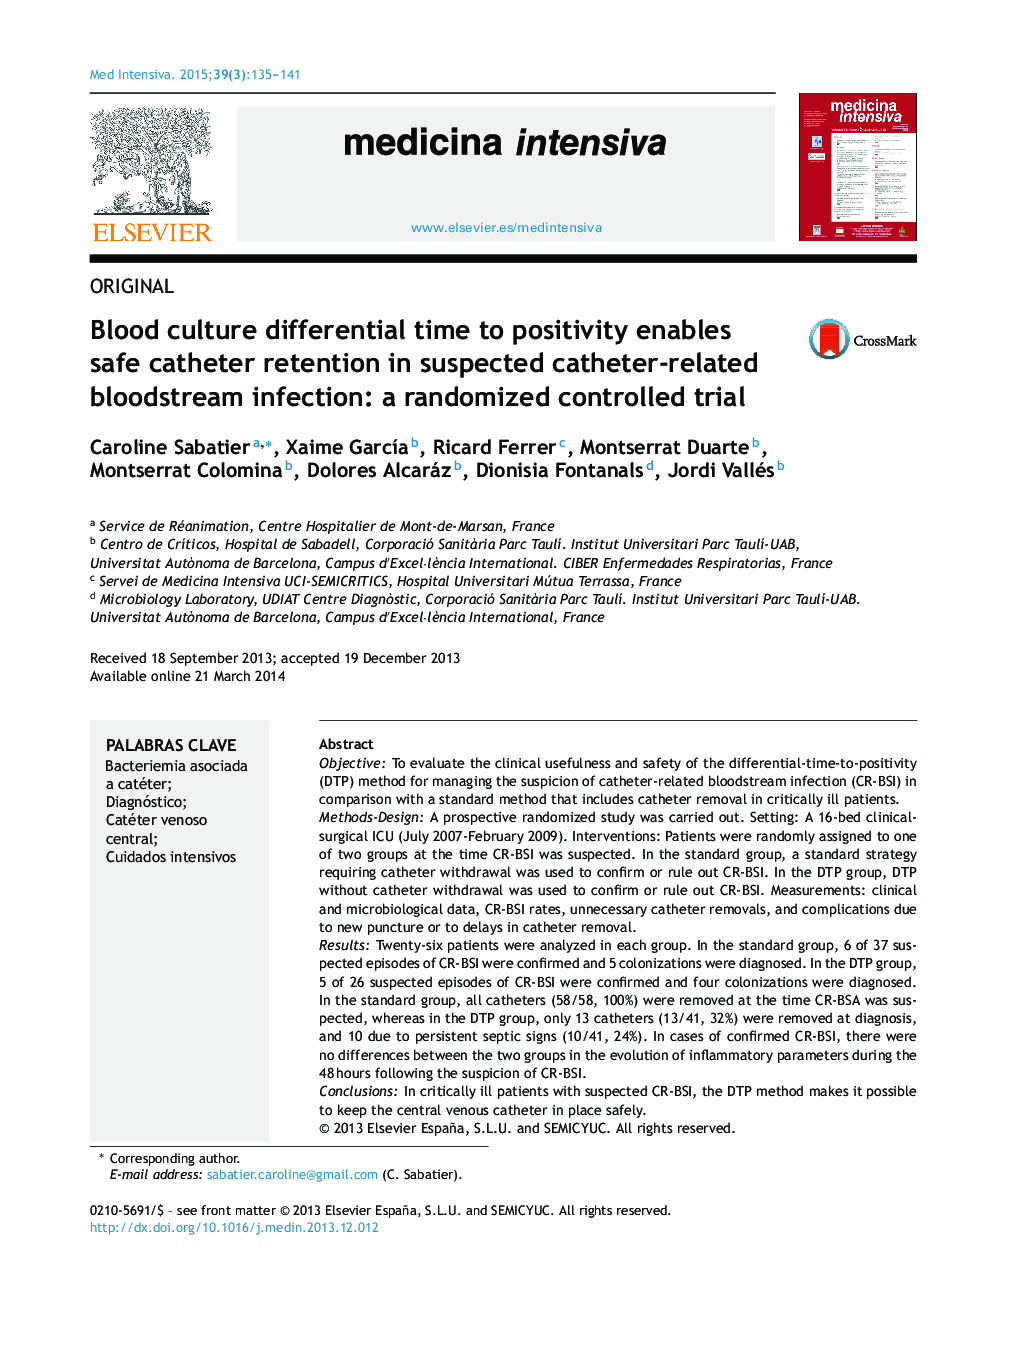 Blood culture differential time to positivity enables safe catheter retention in suspected catheter-related bloodstream infection: a randomized controlled trial